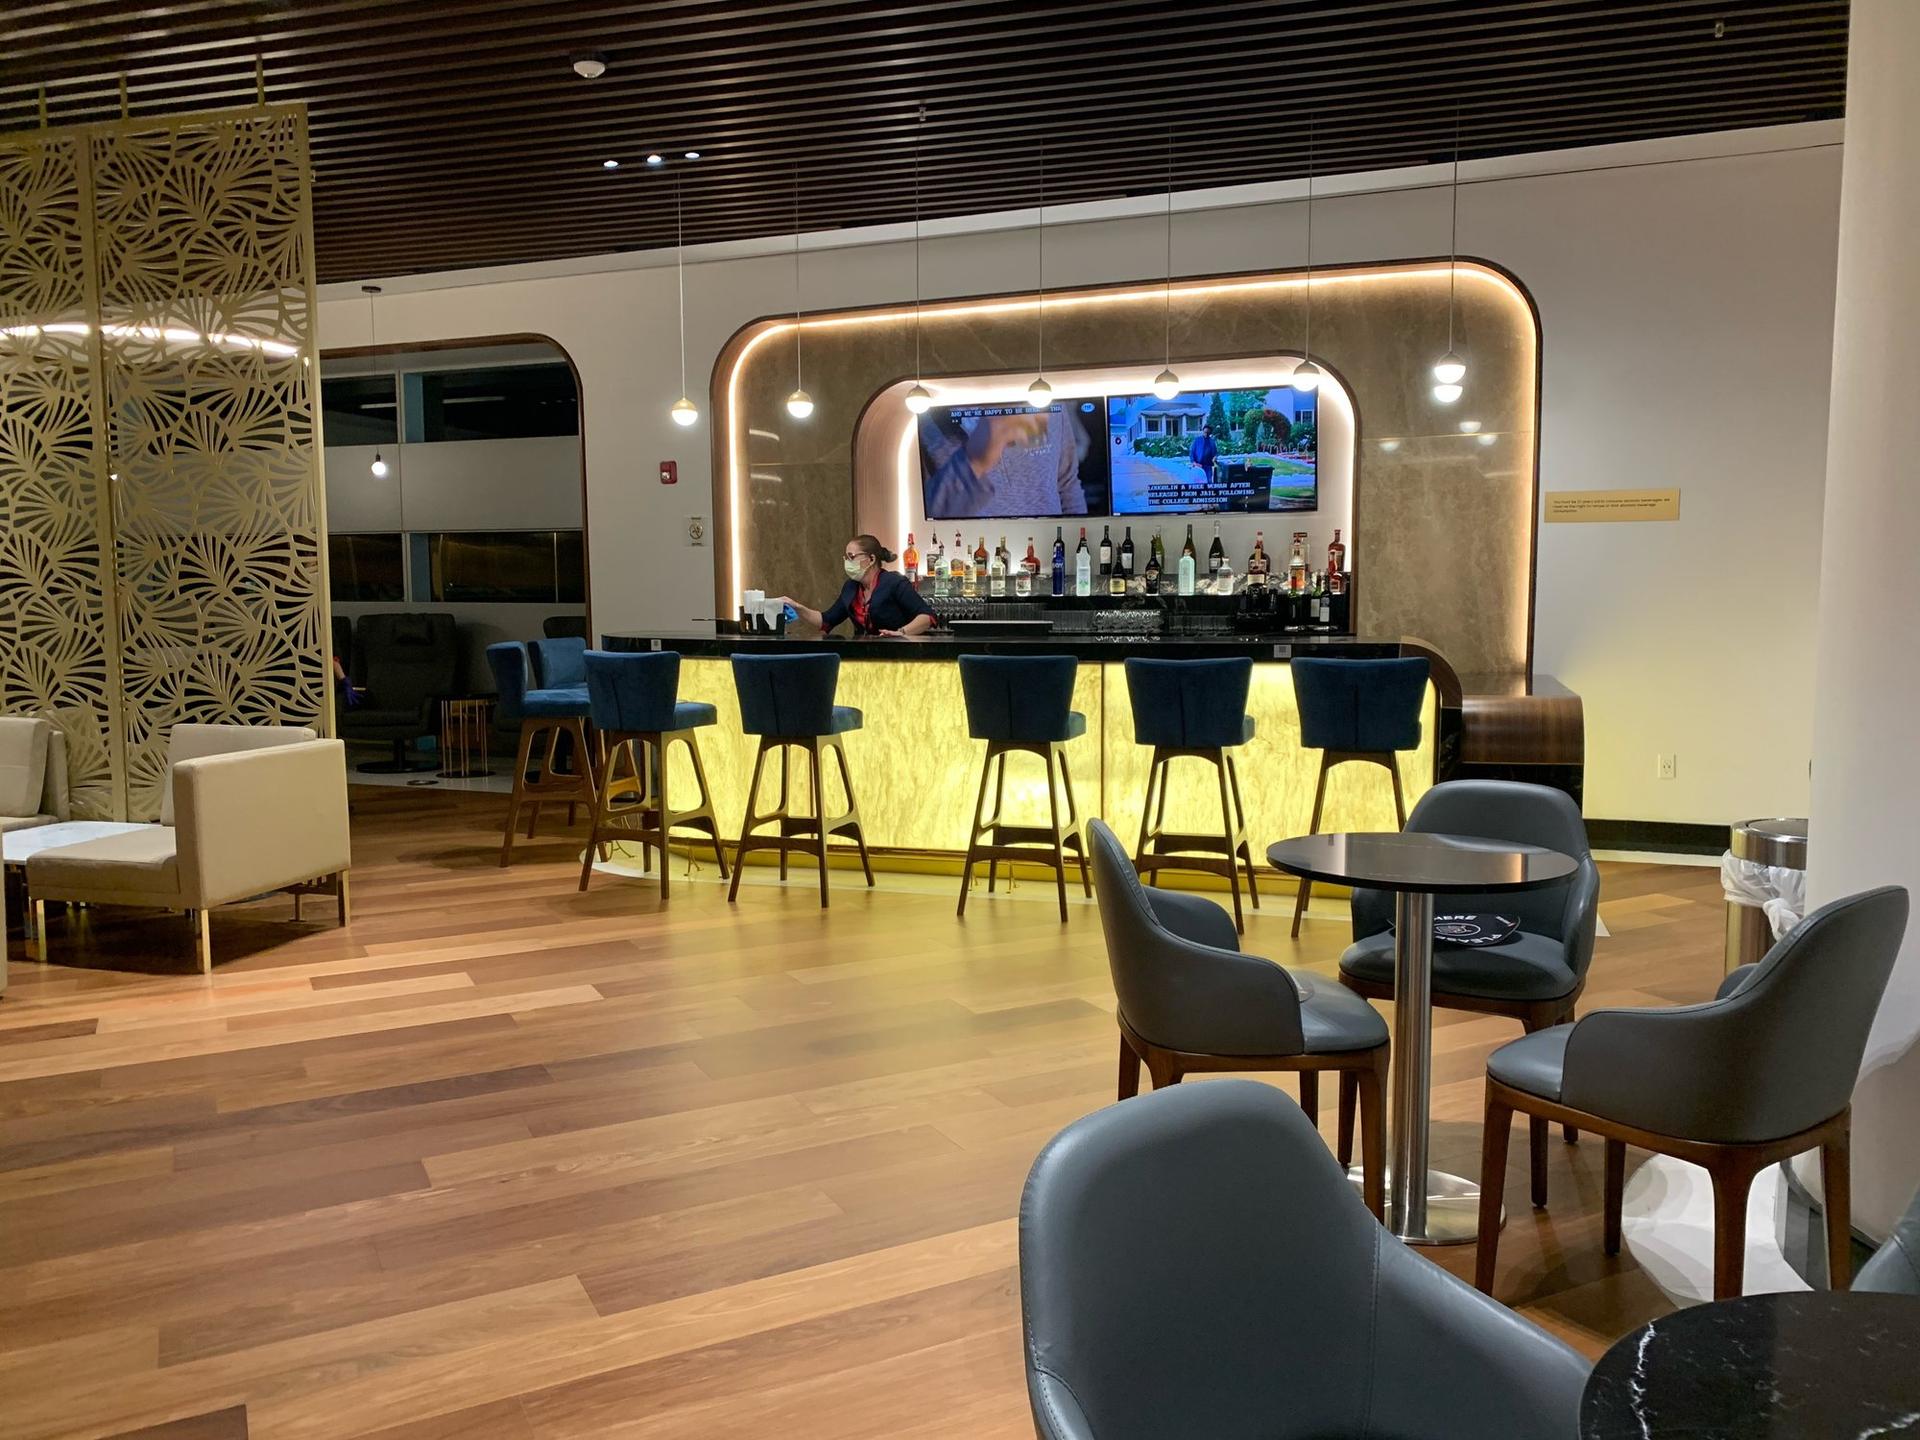 Turkish Airlines Lounge image 3 of 8